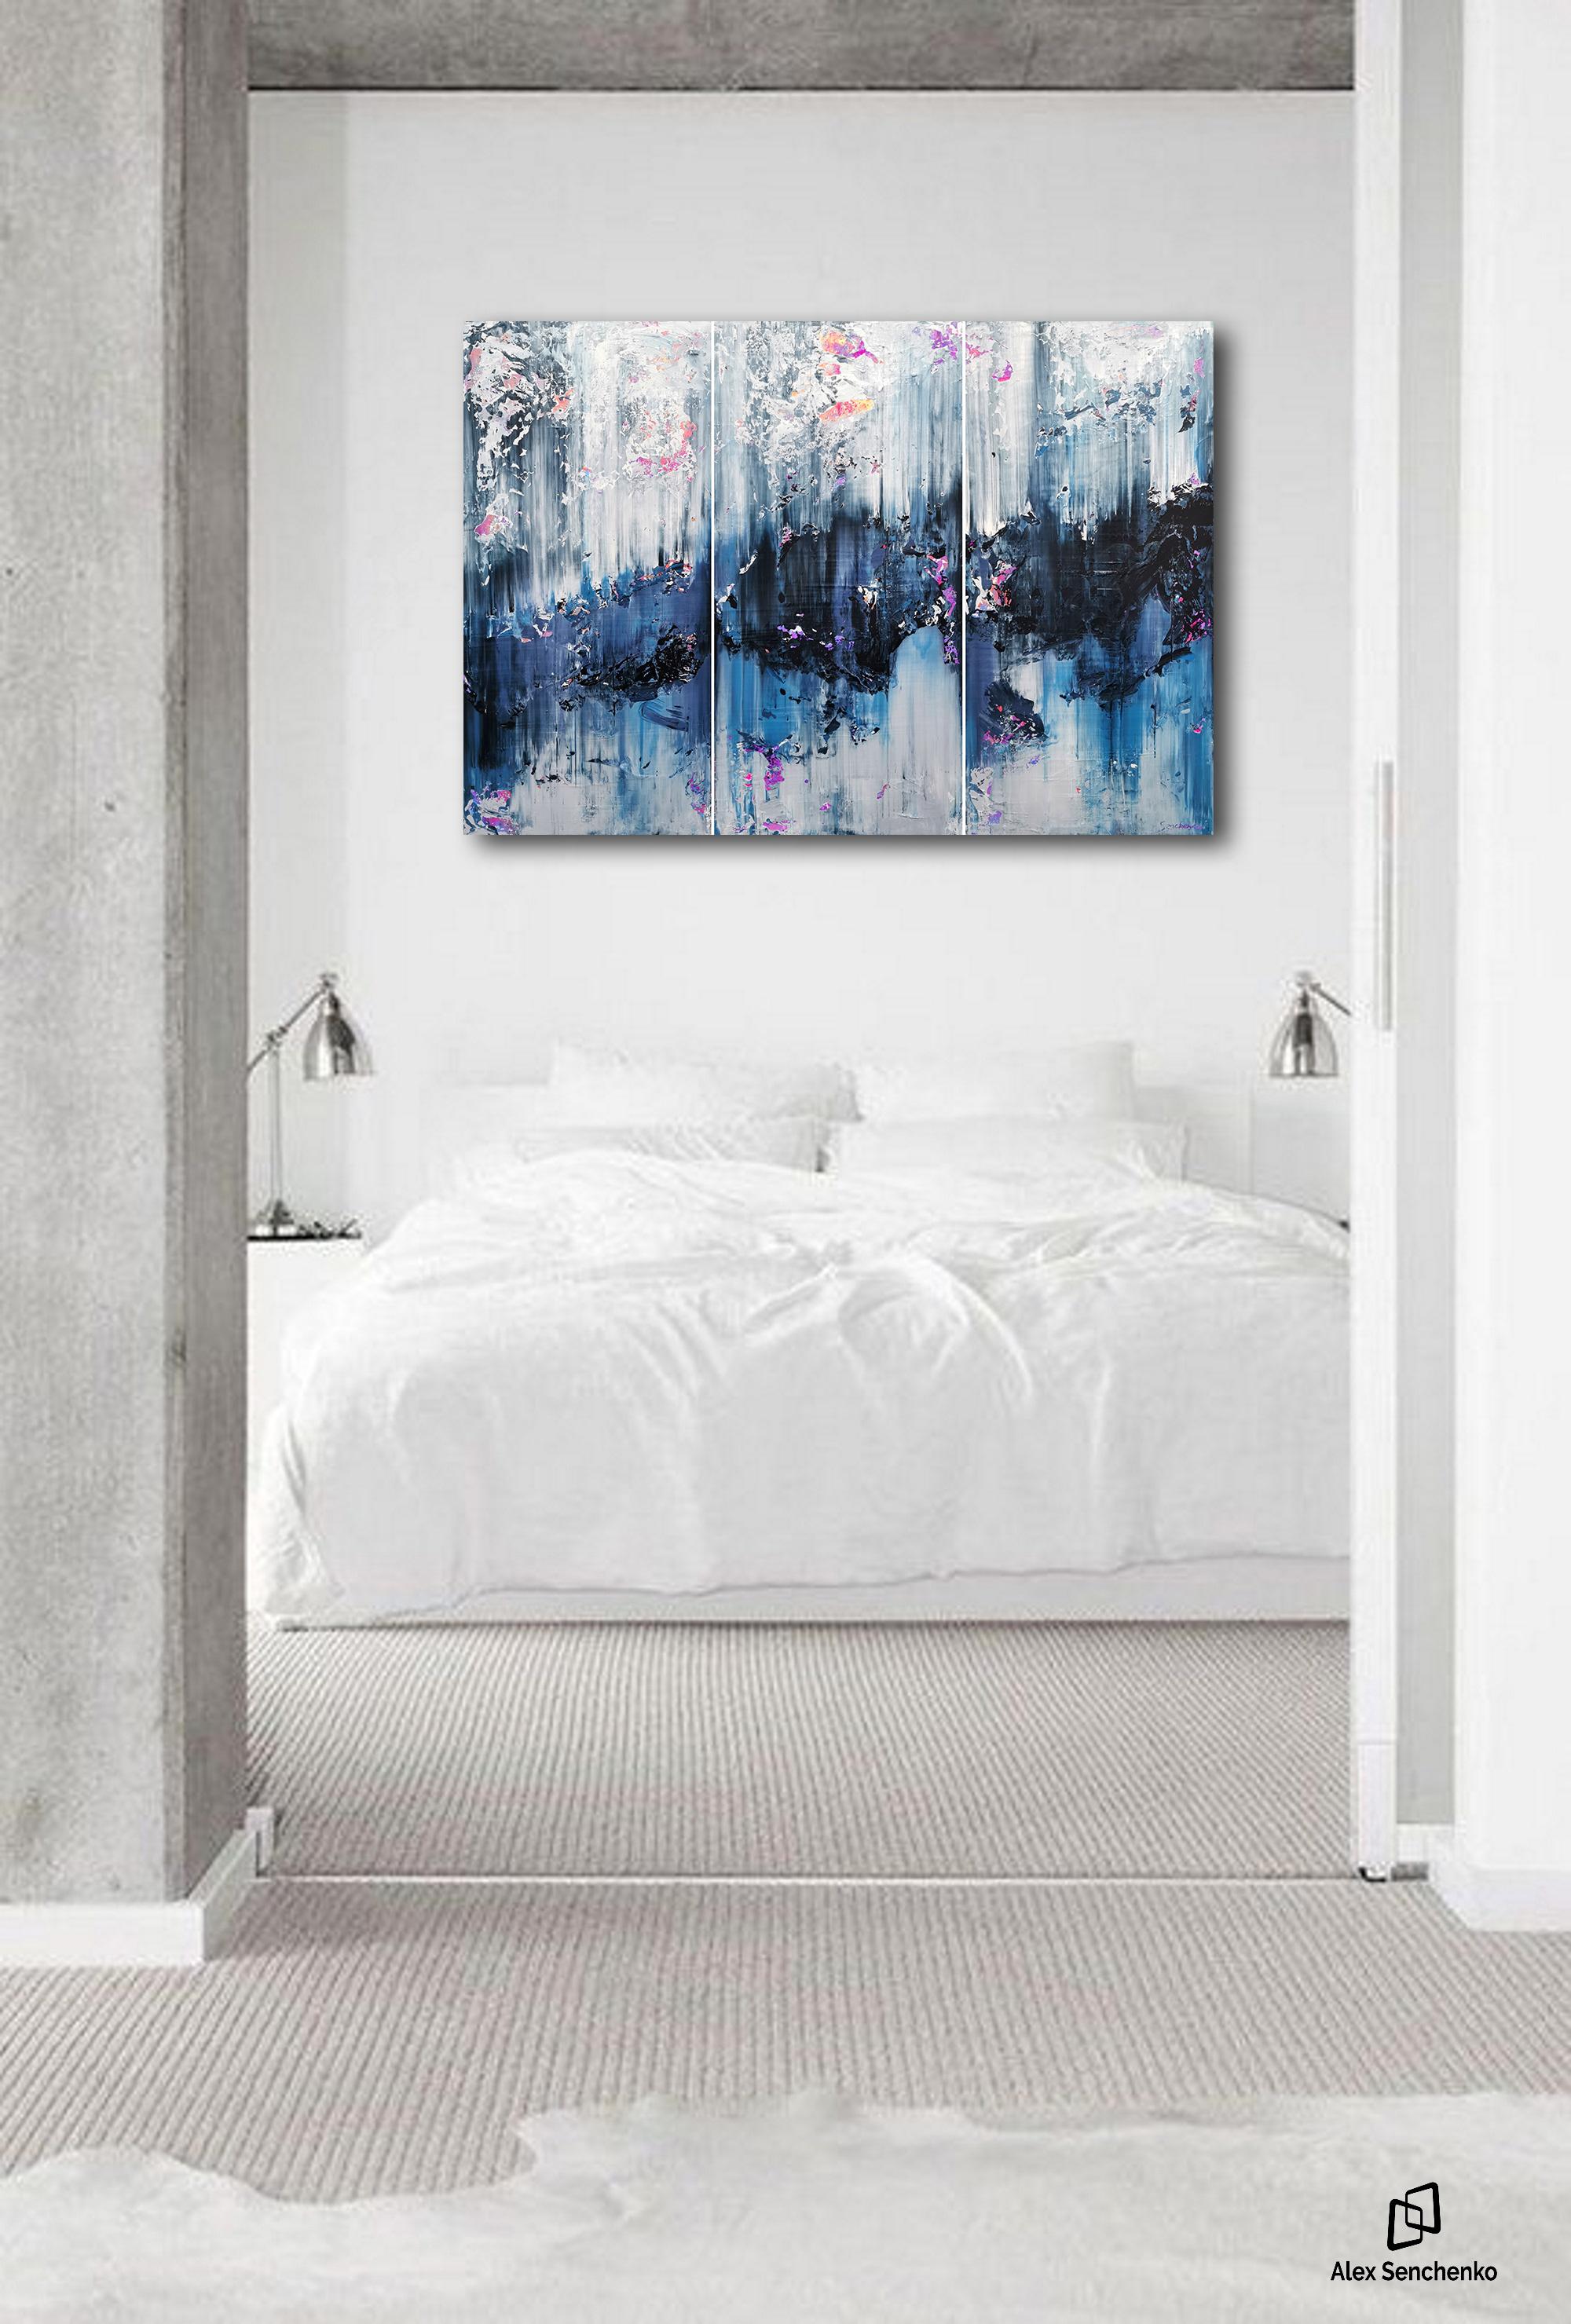 There’s something ethereal, almost magical, about contemporary paintings. The
incredible Expressionism bleeds through the canvas, transforming any room into an
entirely new experience. Alex Senchenko’s ,, Abstract 2185 ,, painting will give your